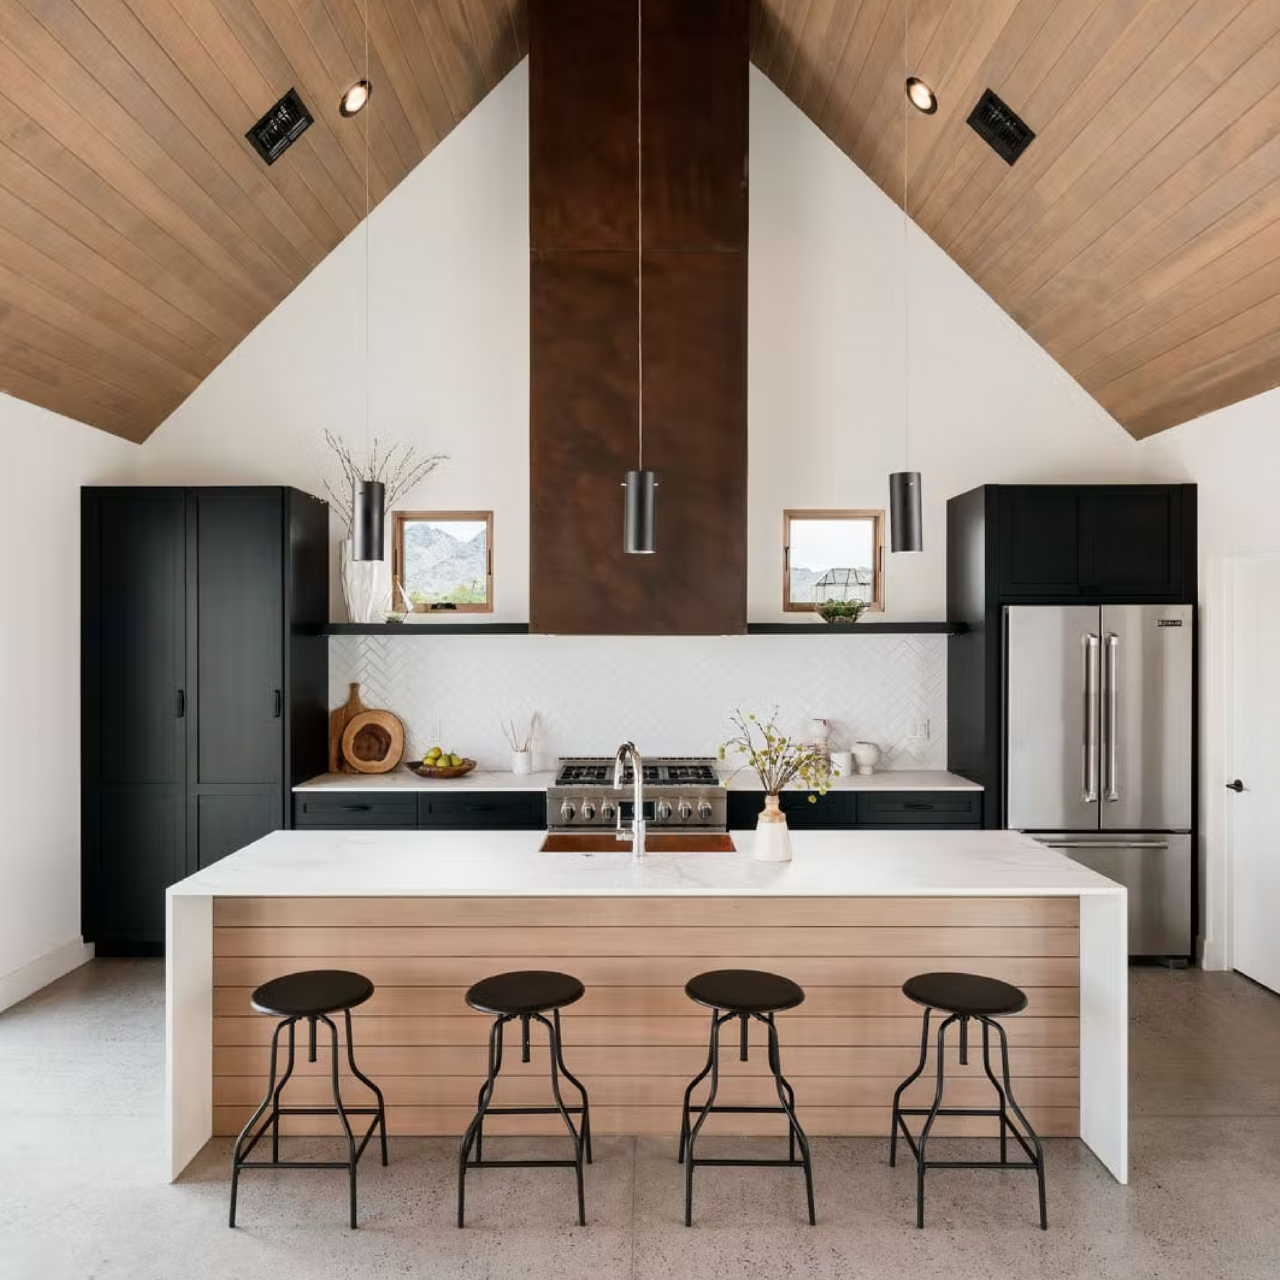 A sleek kitchen design with ultra-compact countertops in Austin, Texas.